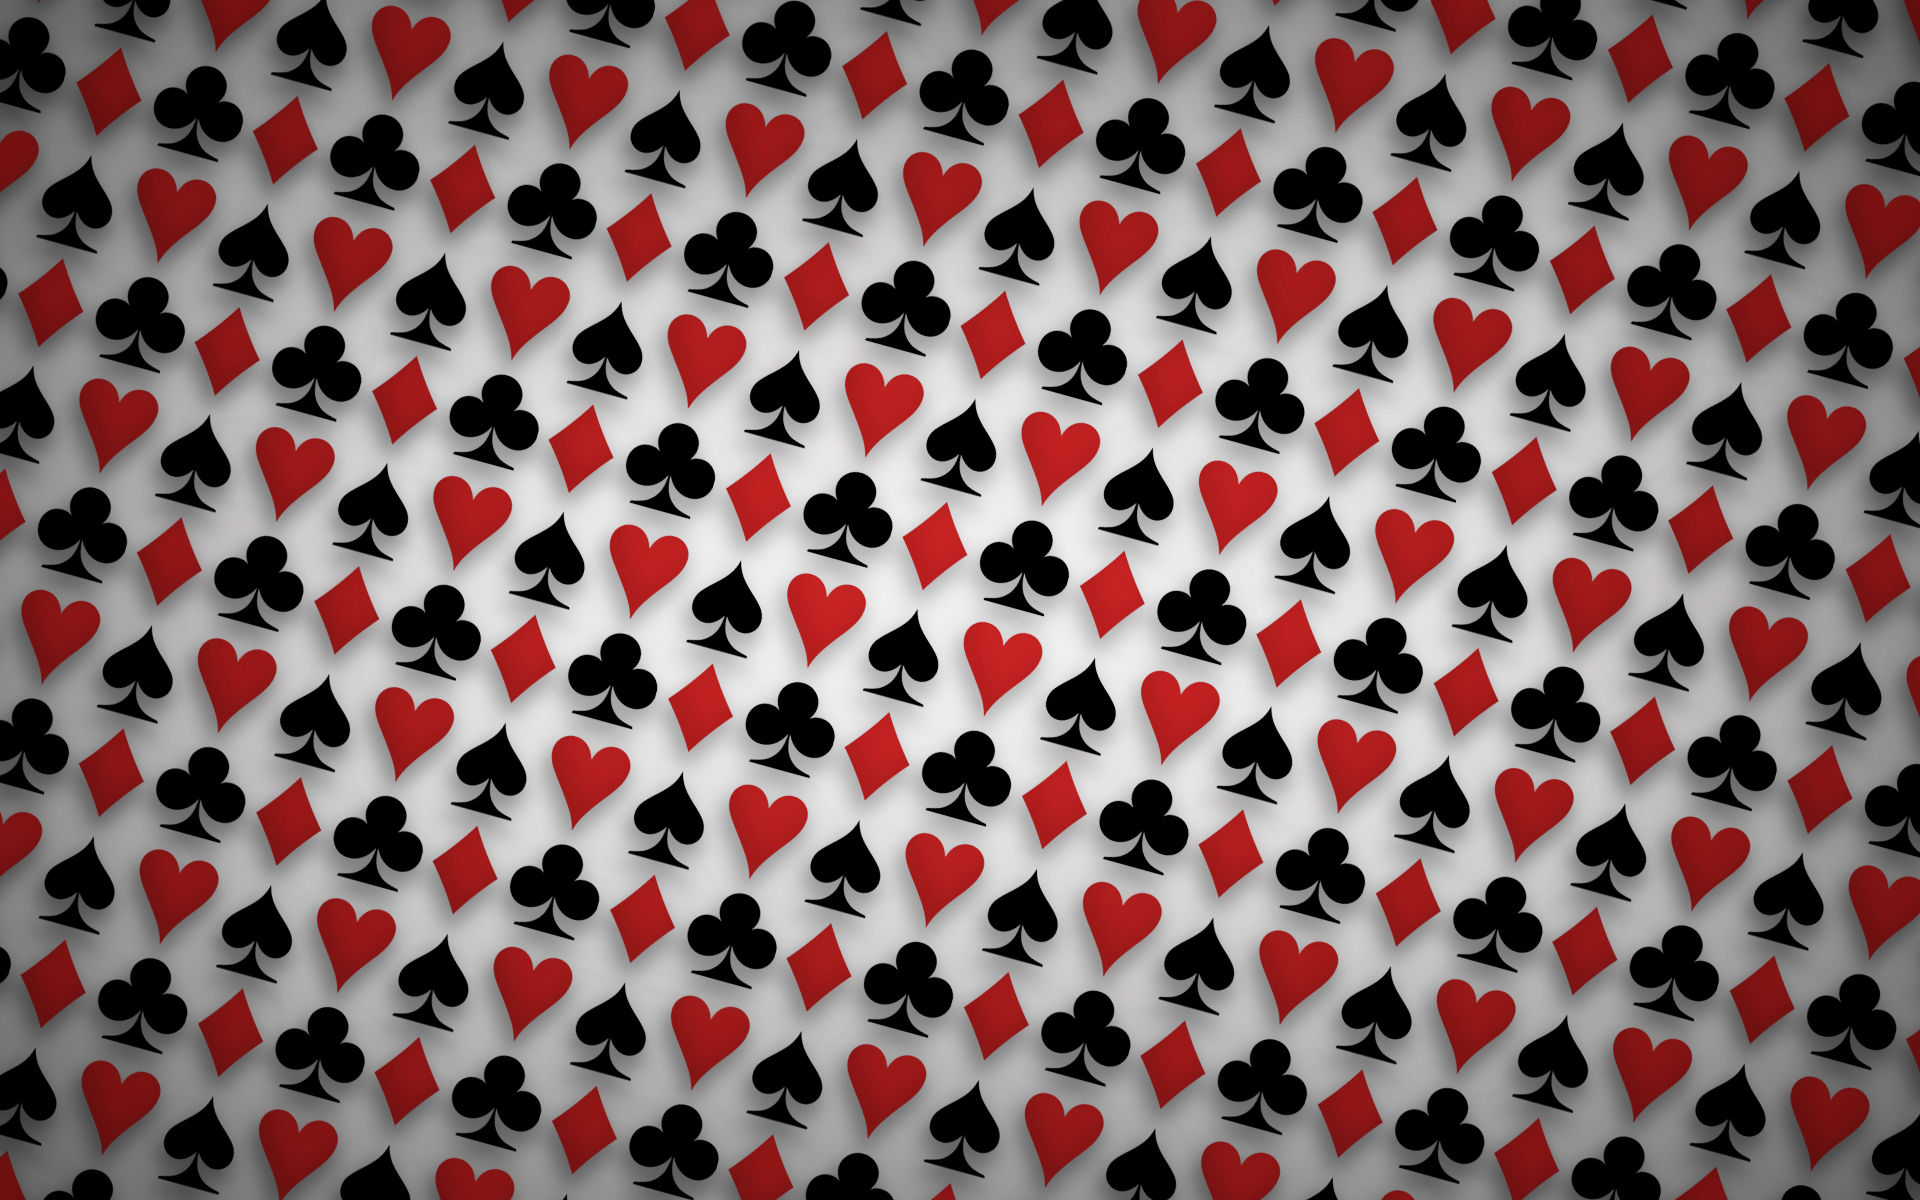 Suit Spades Hearts Background Texture Cards Pattern